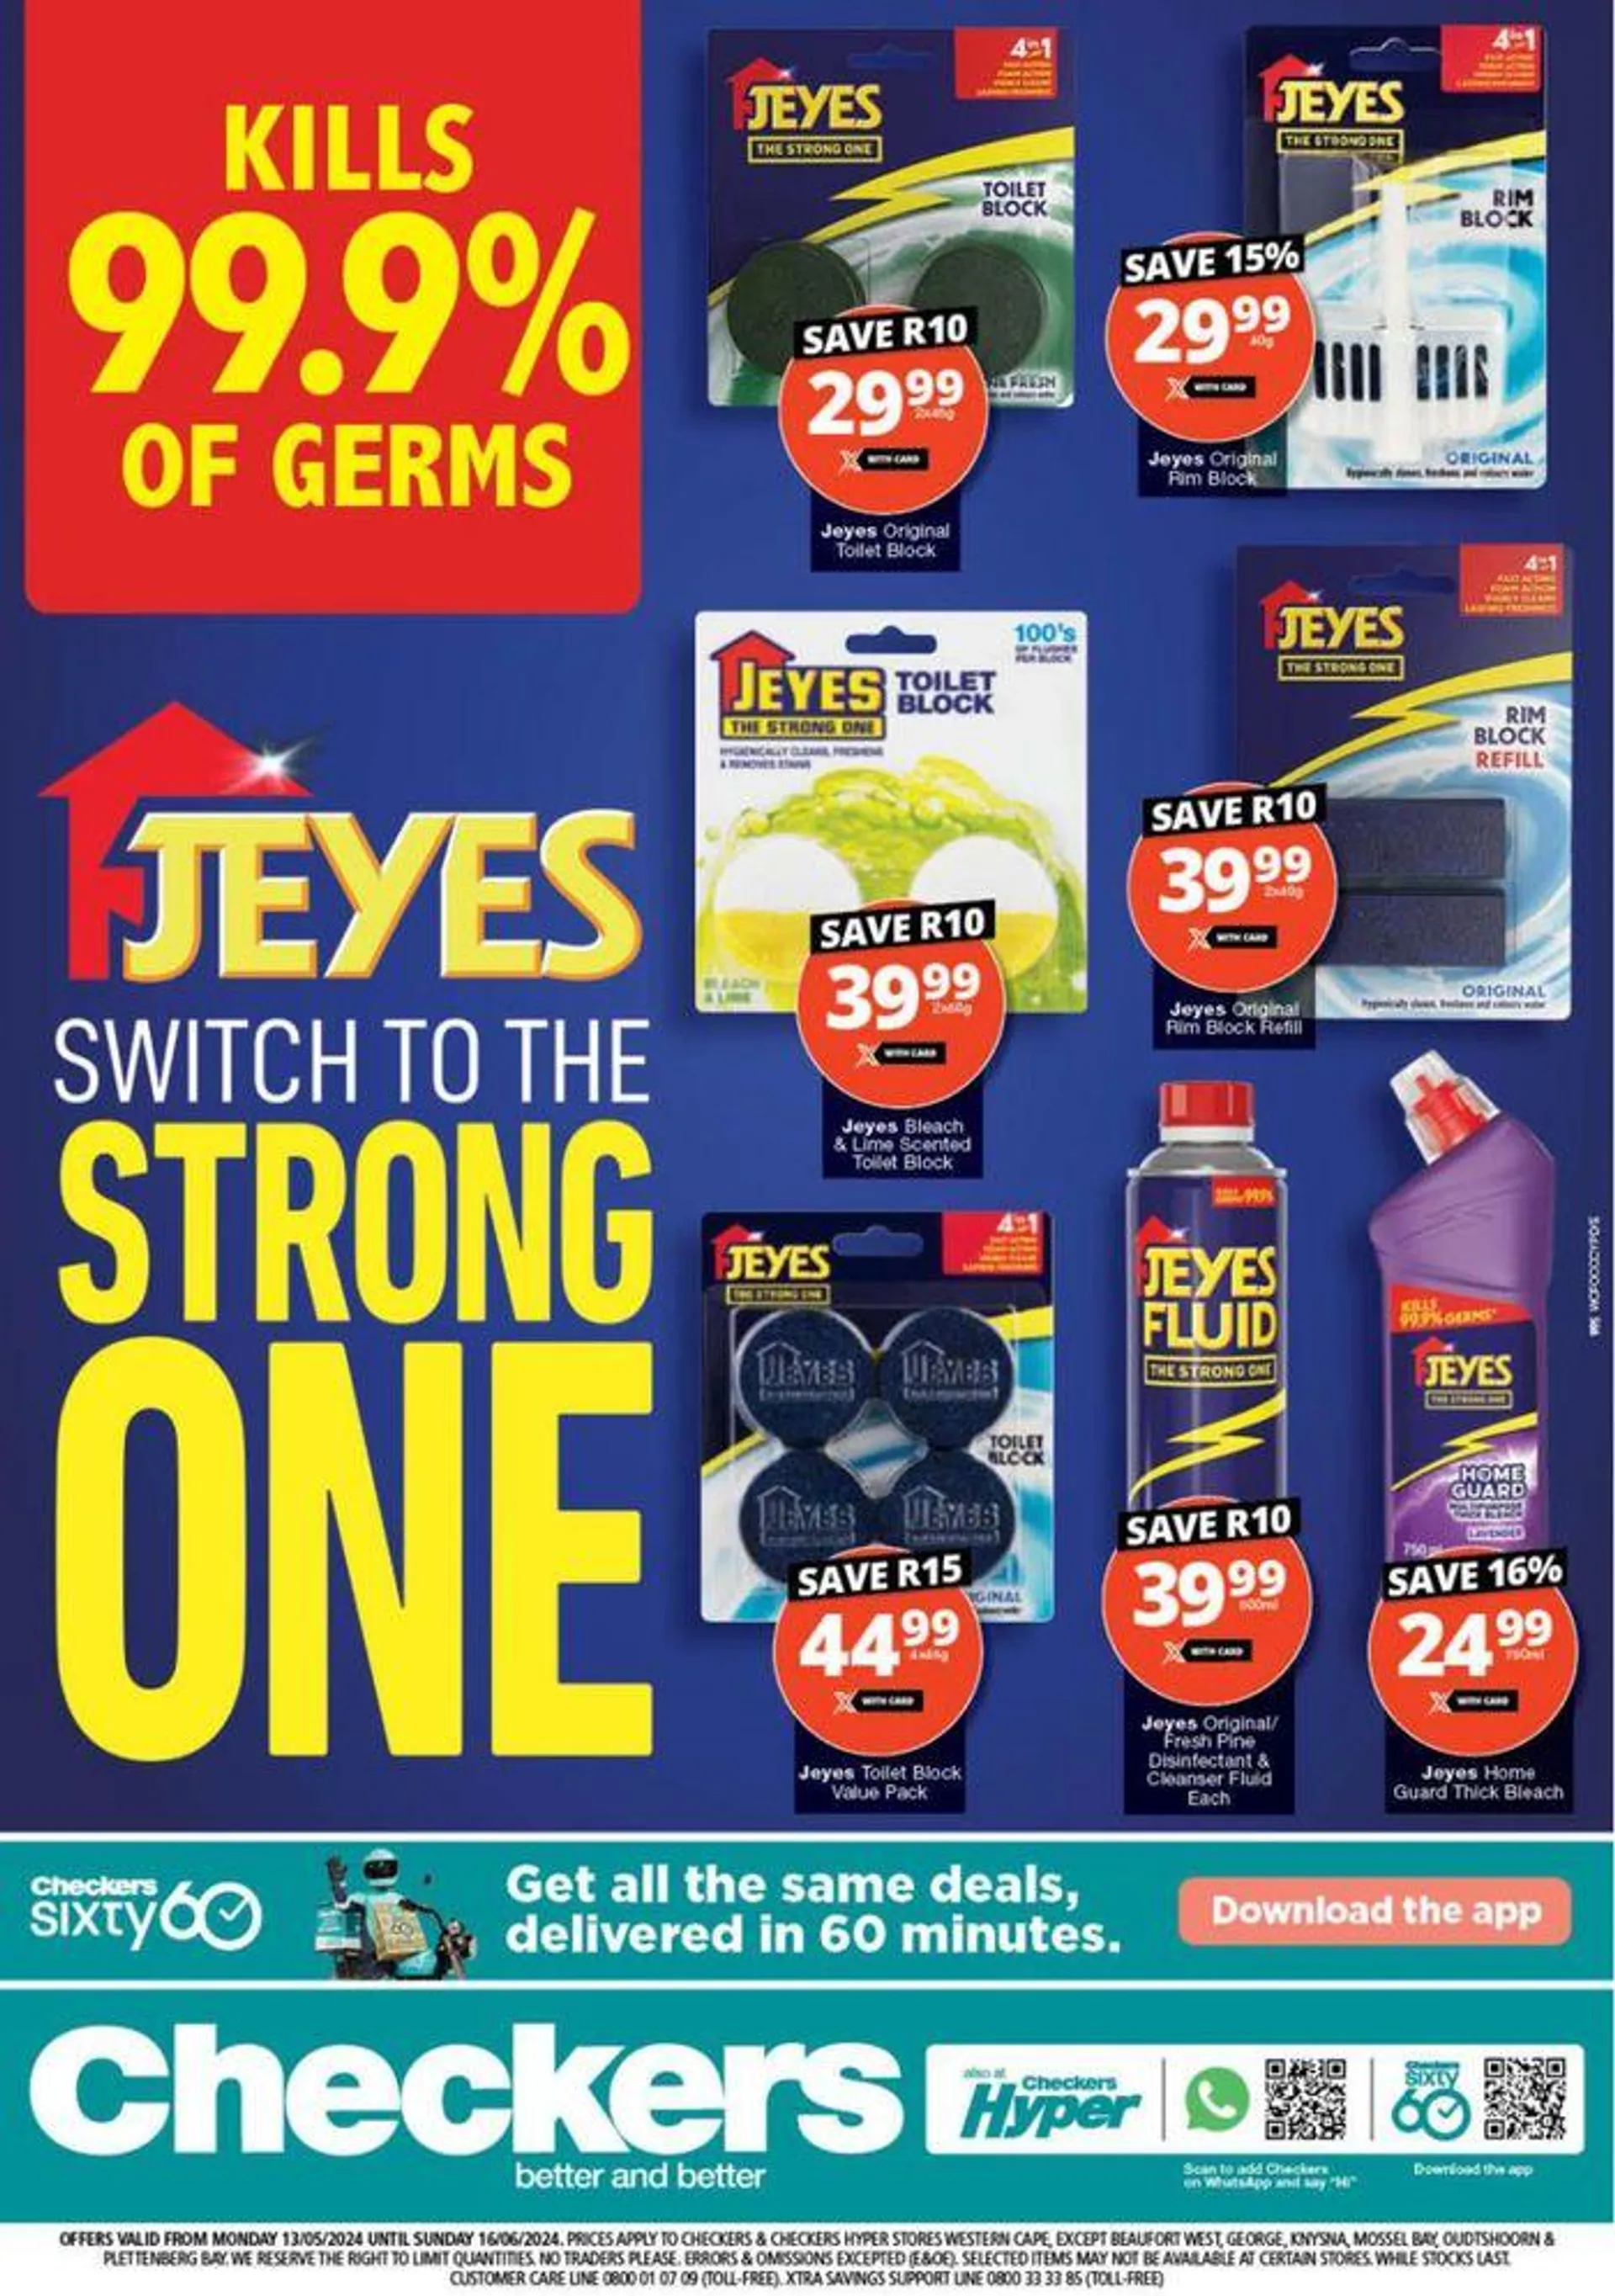 Checkers Jeyes Promotion 13 May - 16 June - 1